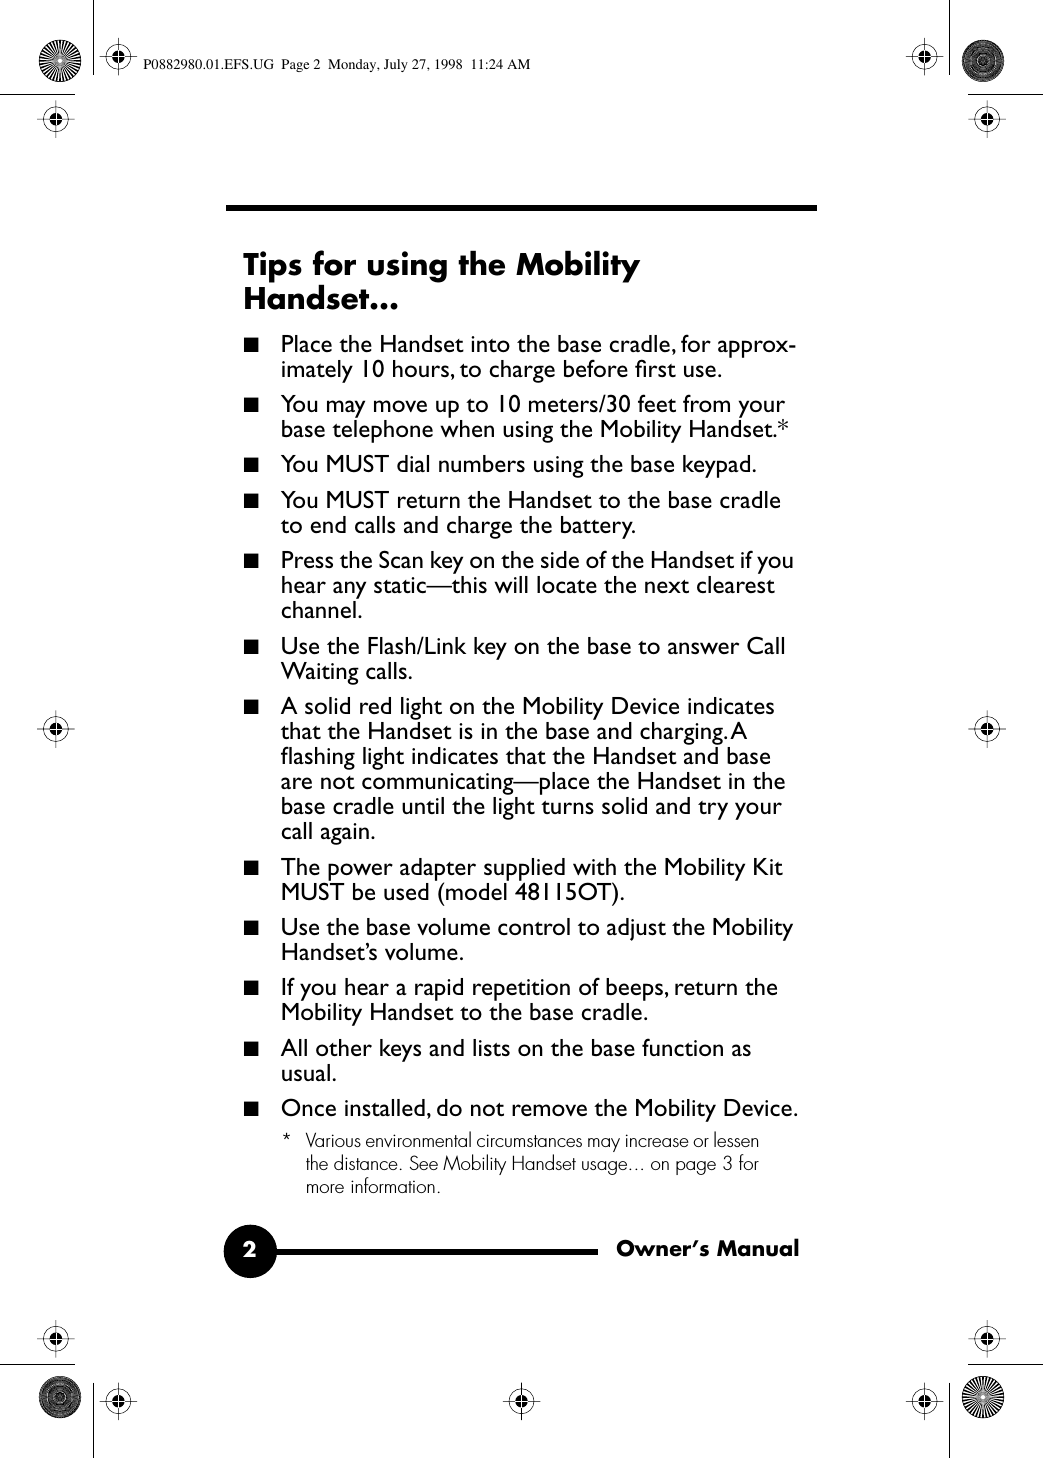  Owner’s Manual2 Tips for using the Mobility Handset... ■ Place the Handset into the base cradle, for approx-imately 10 hours, to charge before ﬁrst use. ■ You may move up to 10 meters/30 feet from your base telephone when using the Mobility Handset.*  ■ You MUST dial numbers using the base keypad. ■ You MUST return the Handset to the base cradle to end calls and charge the battery. ■ Press the Scan key on the side of the Handset if you hear any static—this will locate the next clearest channel. ■ Use the Flash/Link key on the base to answer Call Waiting calls. ■ A solid red light on the Mobility Device indicates that the Handset is in the base and charging. A ﬂashing light indicates that the Handset and base are not communicating—place the Handset in the base cradle until the light turns solid and try your call again. ■ The power adapter supplied with the Mobility Kit MUST be used (model 48115OT). ■ Use the base volume control to adjust the Mobility Handset’s volume. ■ If you hear a rapid repetition of beeps, return the Mobility Handset to the base cradle. ■ All other keys and lists on the base function as usual. ■ Once installed, do not remove the Mobility Device. * Various environmental circumstances may increase or lessen the distance. See Mobility Handset usage... on page 3 for more information. P0882980.01.EFS.UG  Page 2  Monday, July 27, 1998  11:24 AM